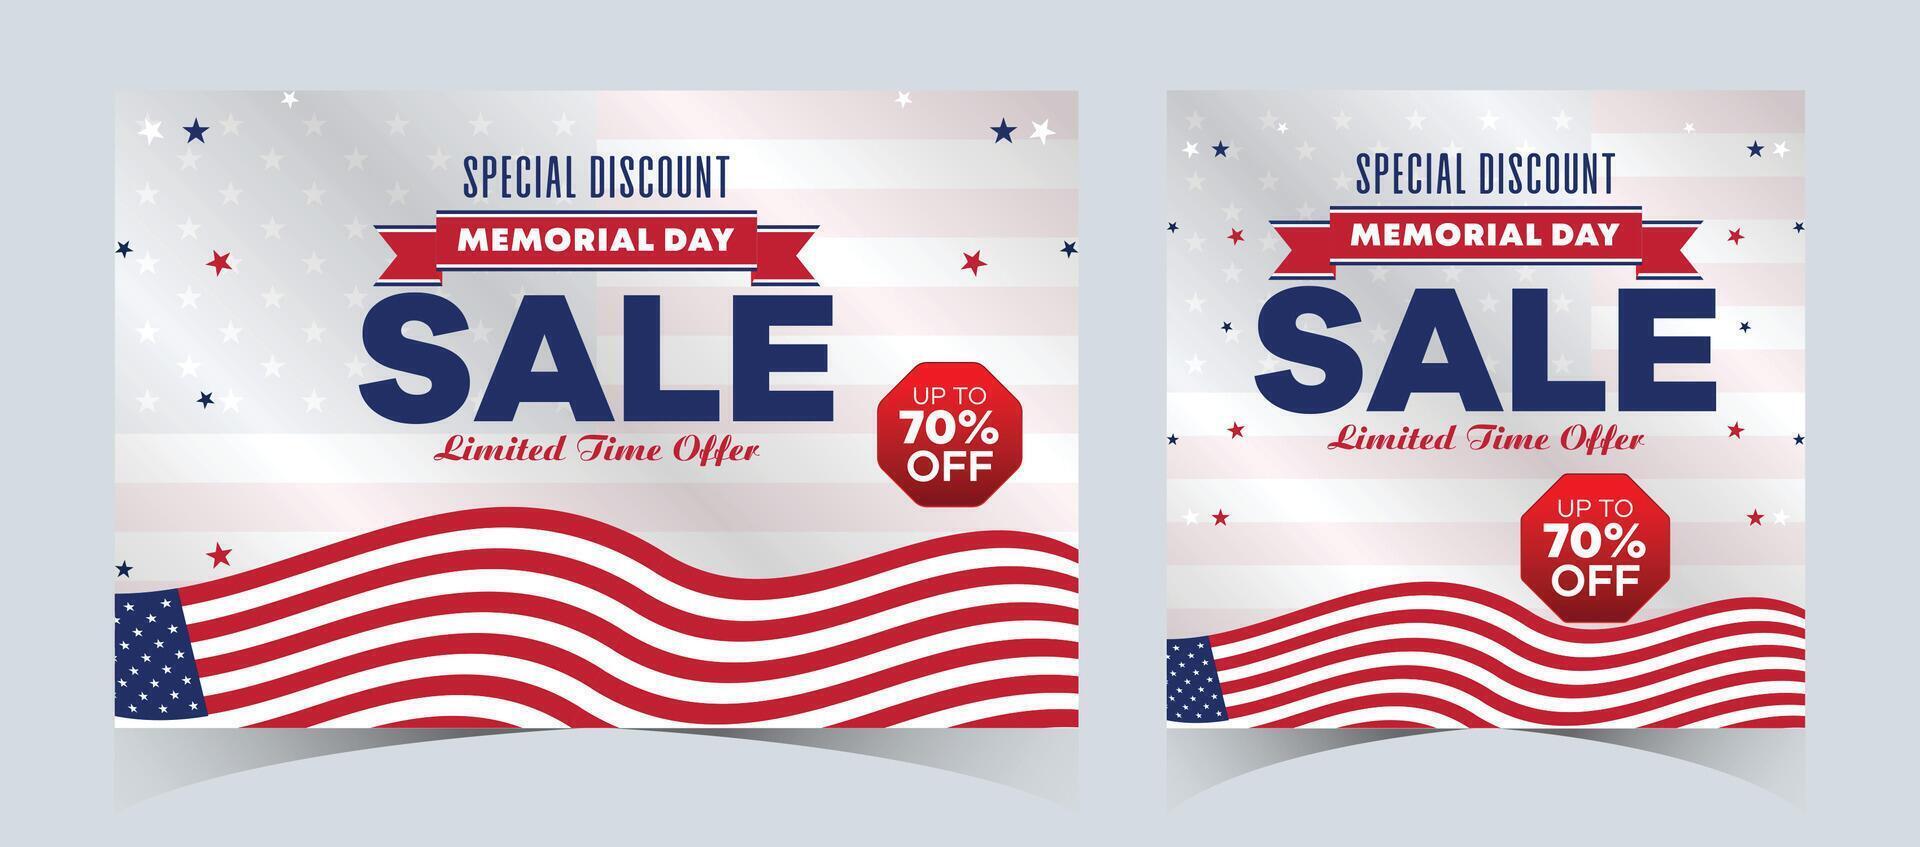 Set of memorial day sale web banner. Happy memorial day holiday sale post. Memorial day weekend sale banner. Memorial Day social media promotion template design in USA national flag colors vector